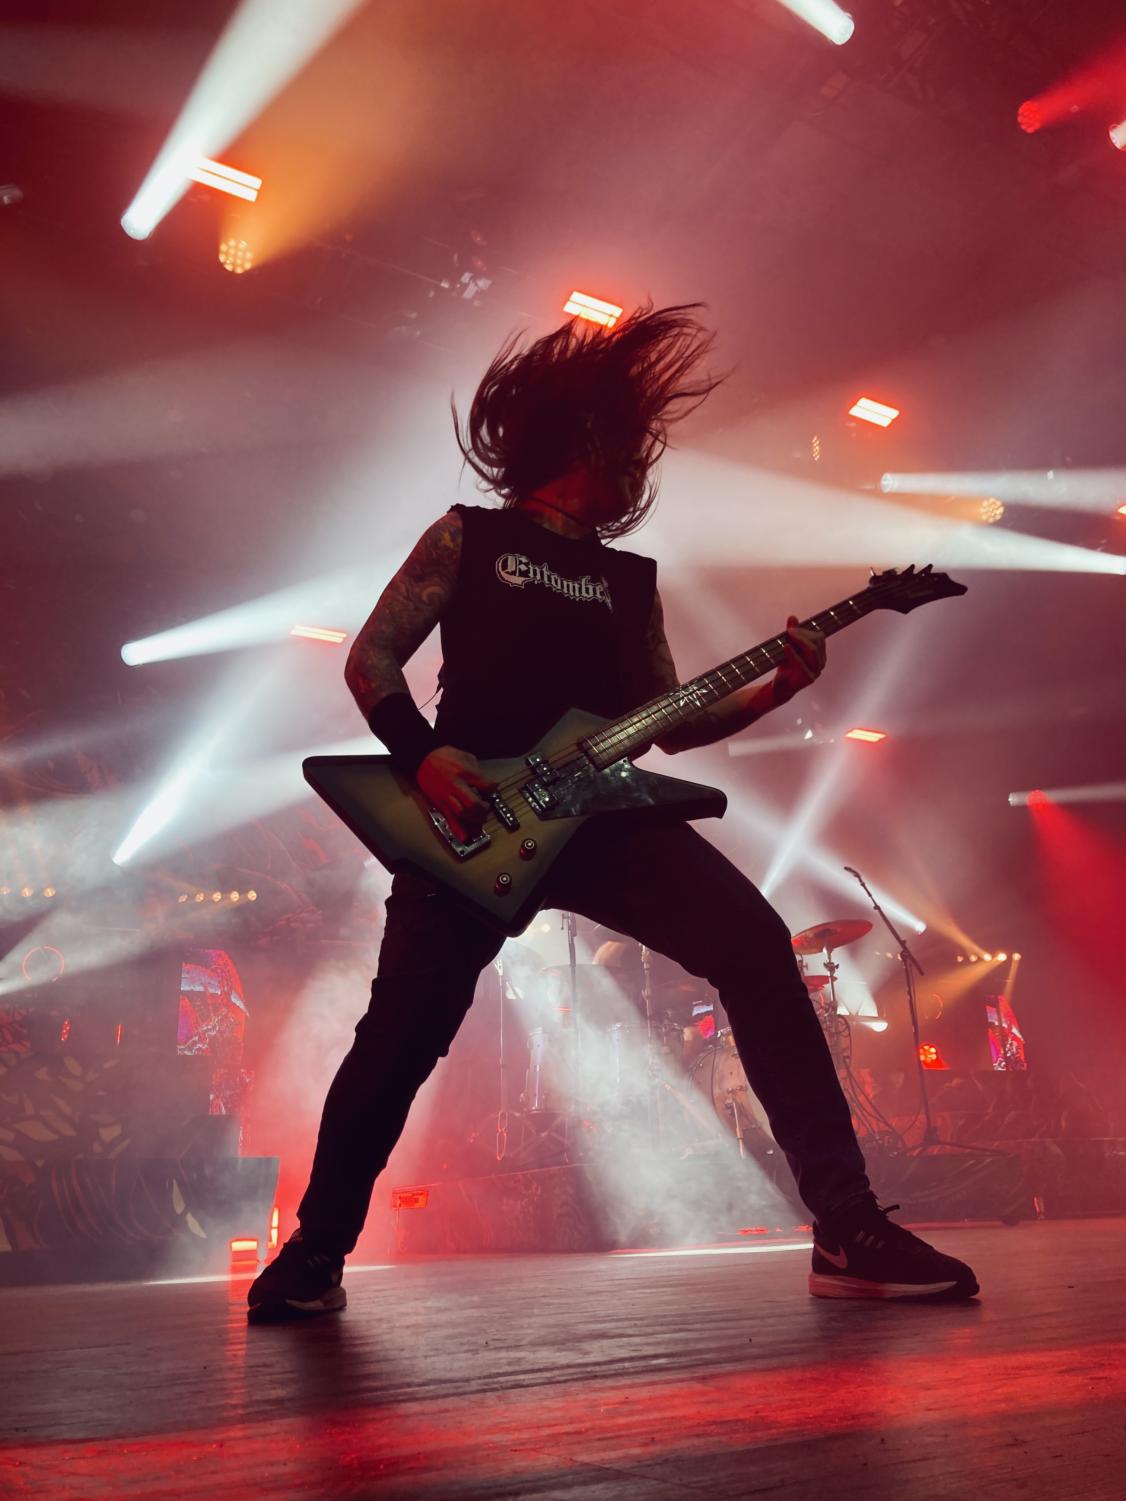 Killswitch Engage bassist Mike D'Antonio's hair flies as he plays.